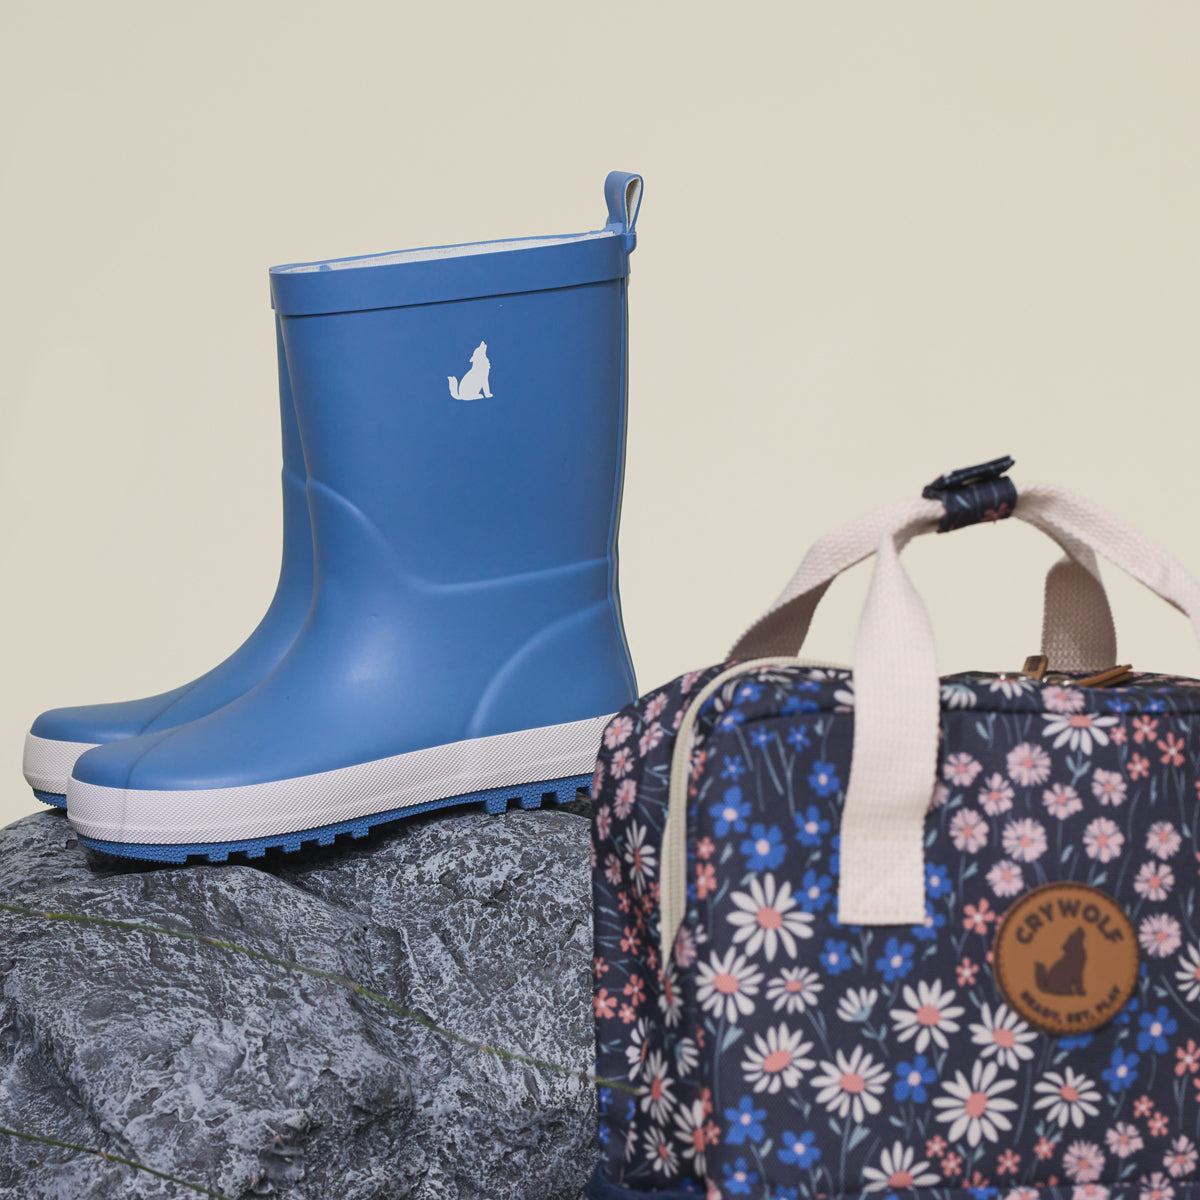 Rain Boots - Southern Blue-Rain Boots-Crywolf Child-EU20-Little Soldiers